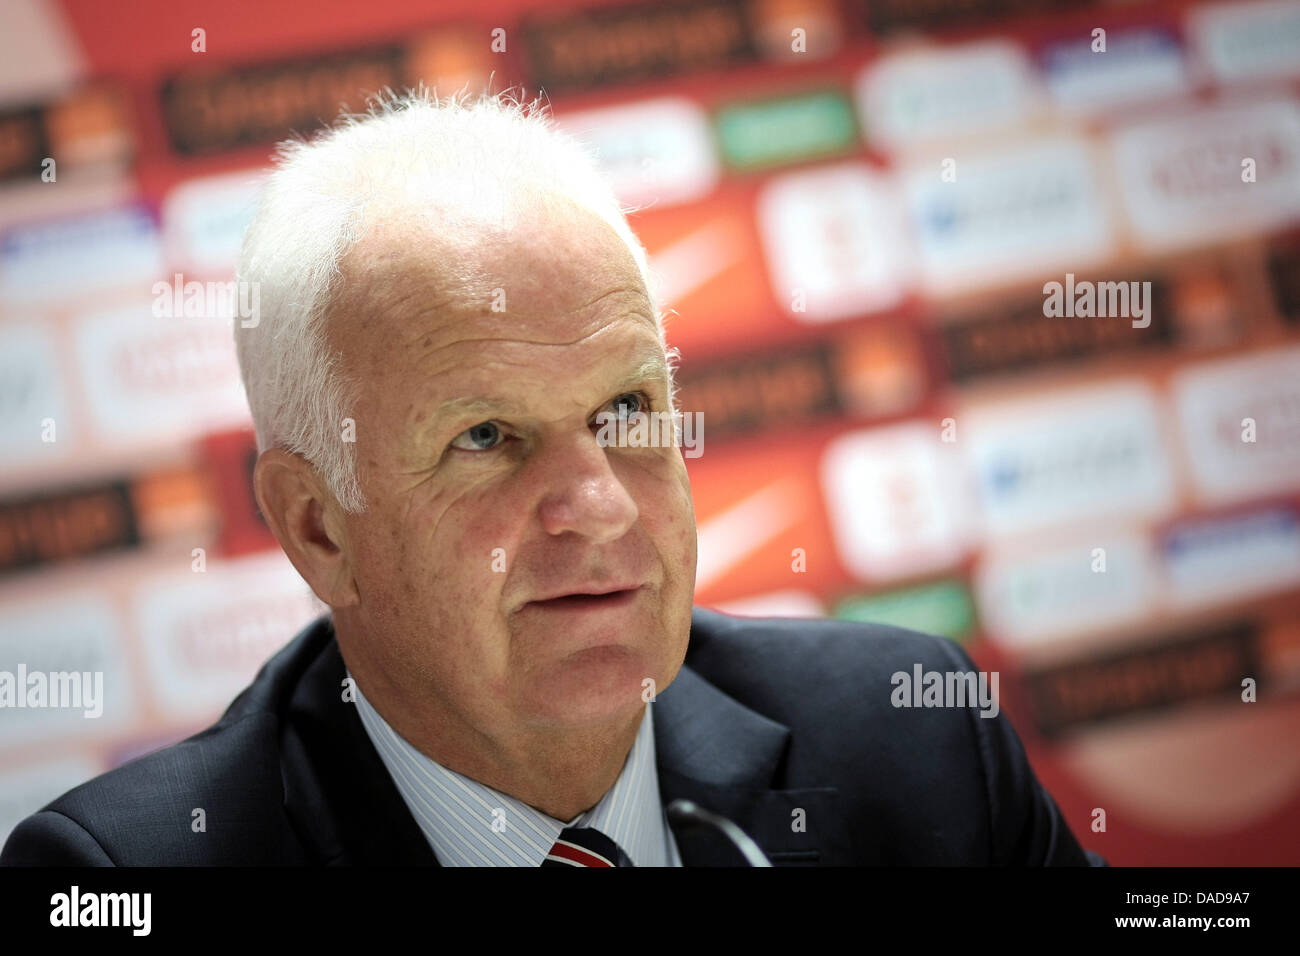 Belarus' coach Bernd Stange seen at a press conference after the international friendly soccer match between Poland and Belarus at the Brita Arena in Wiesbaden, Germany, 11 October 2011. Photo: Fredrik von Erichsen dpa/lhe Stock Photo